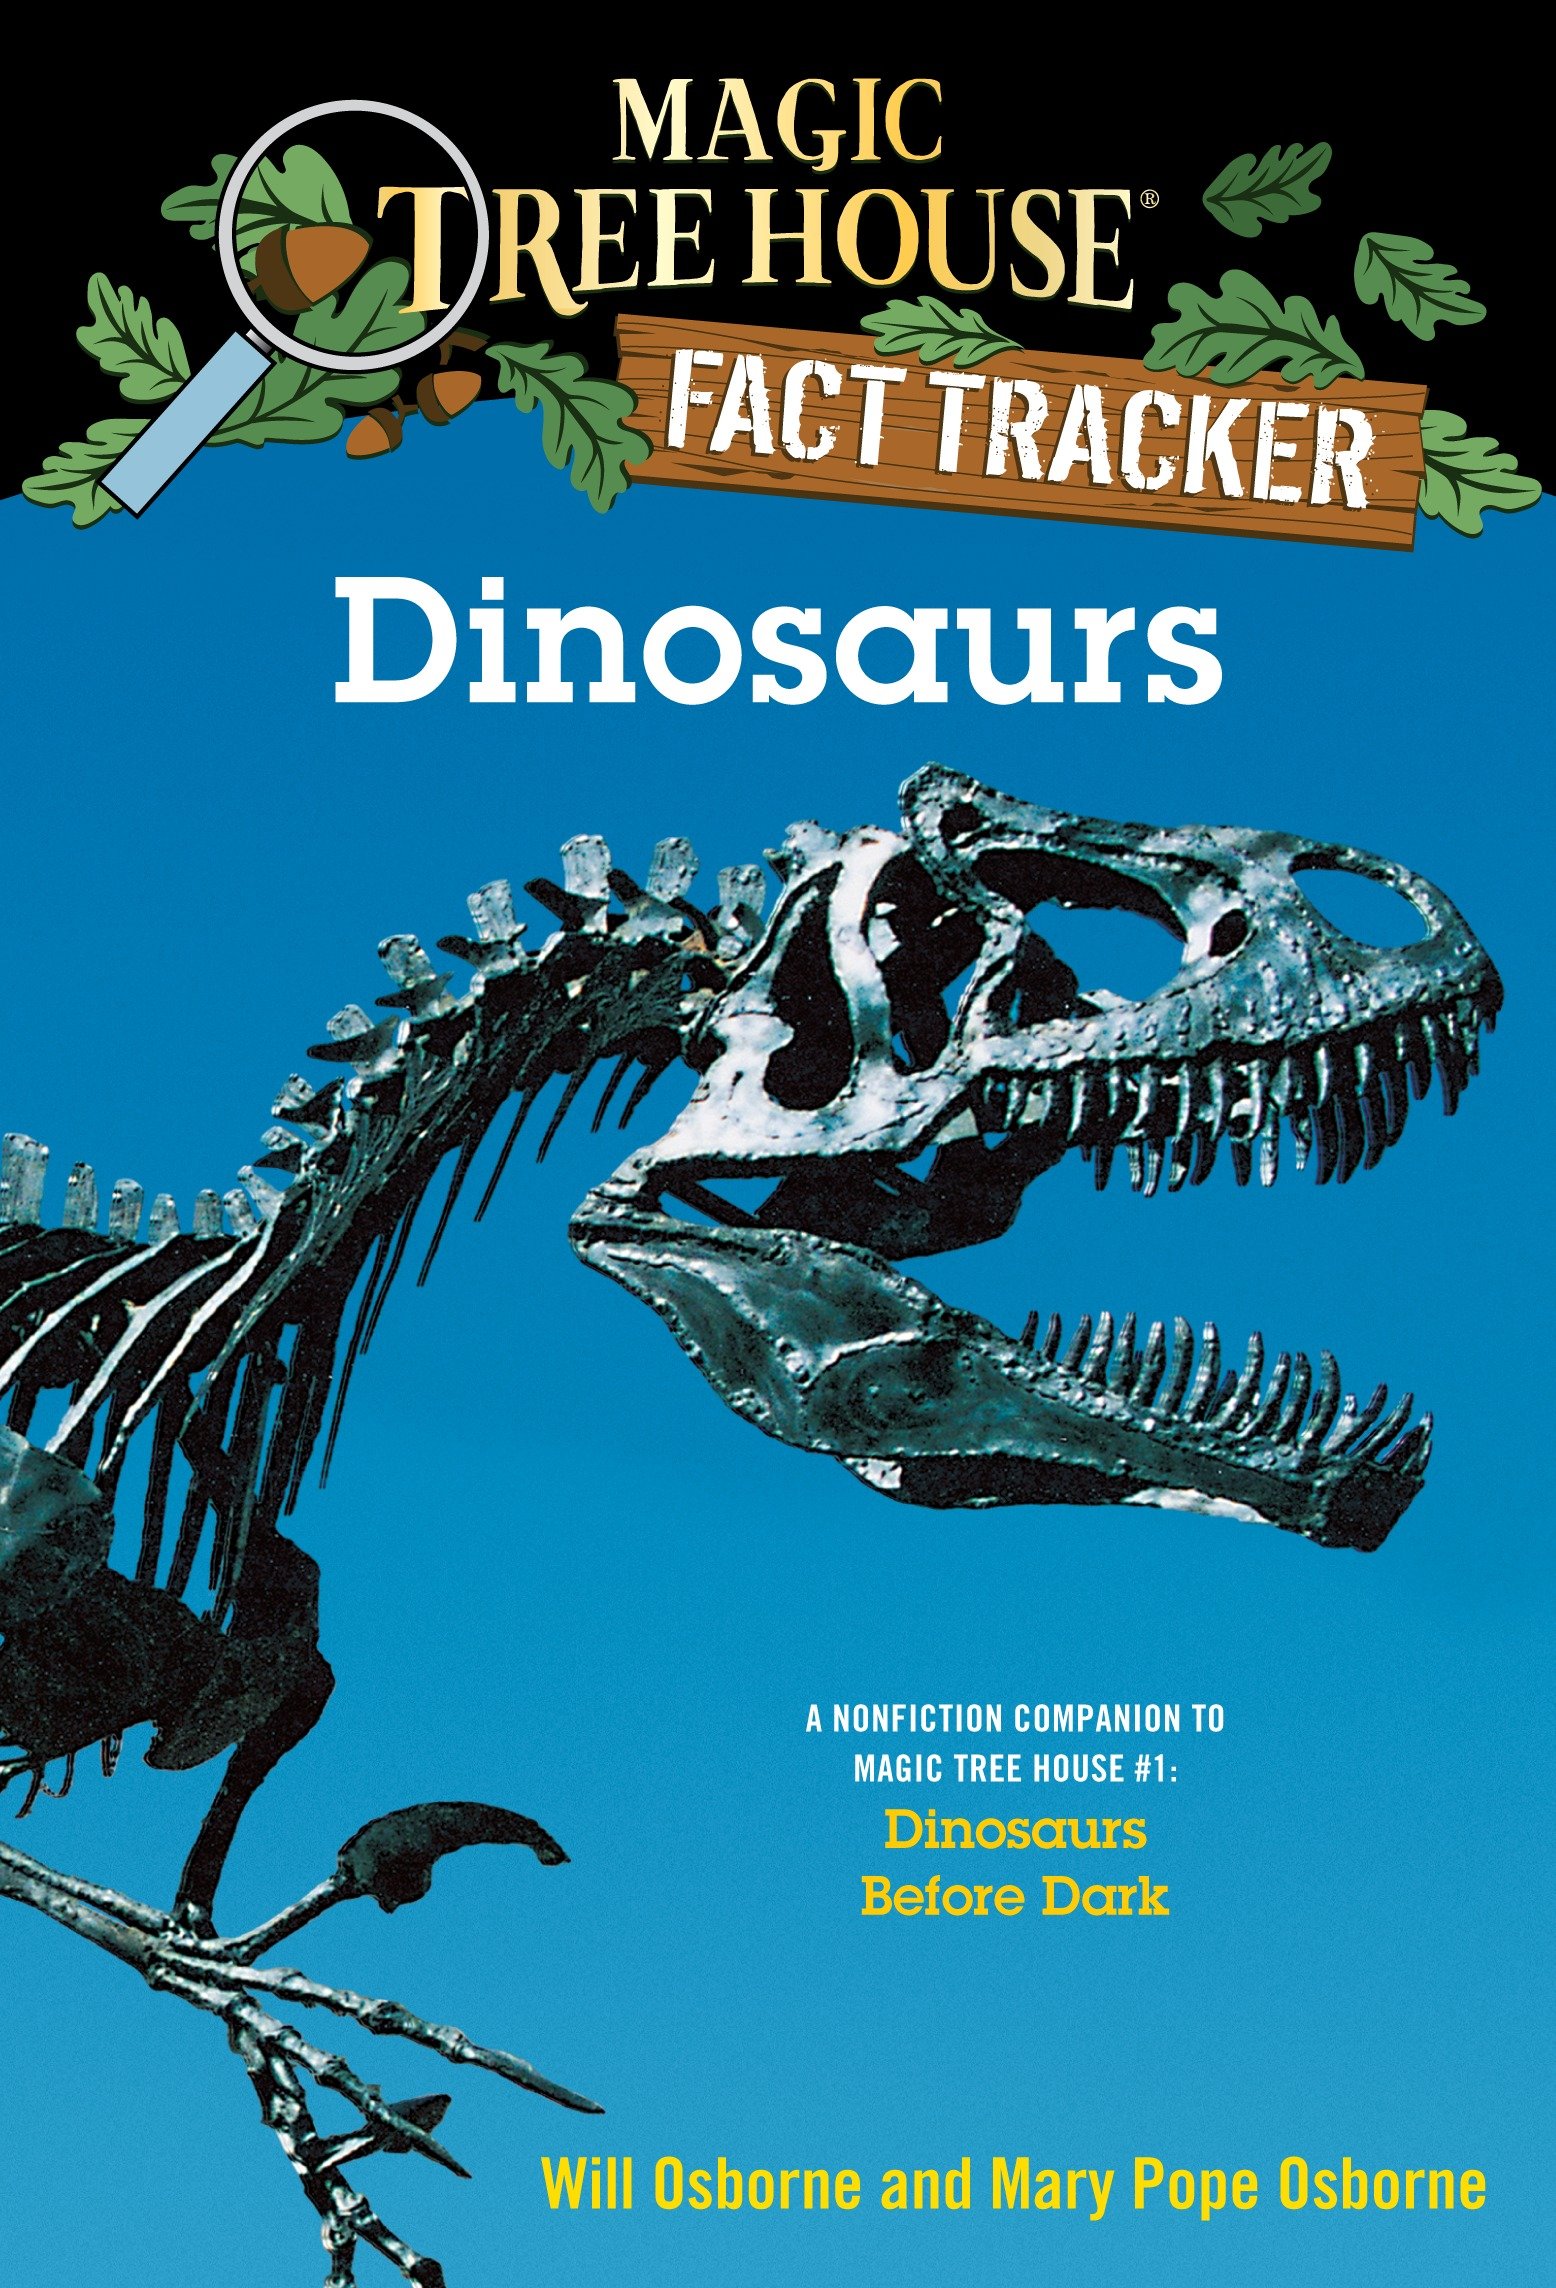 Dinosaurs A Nonfiction Companion to Magic Tree House Dinosaurs Before Dark cover image